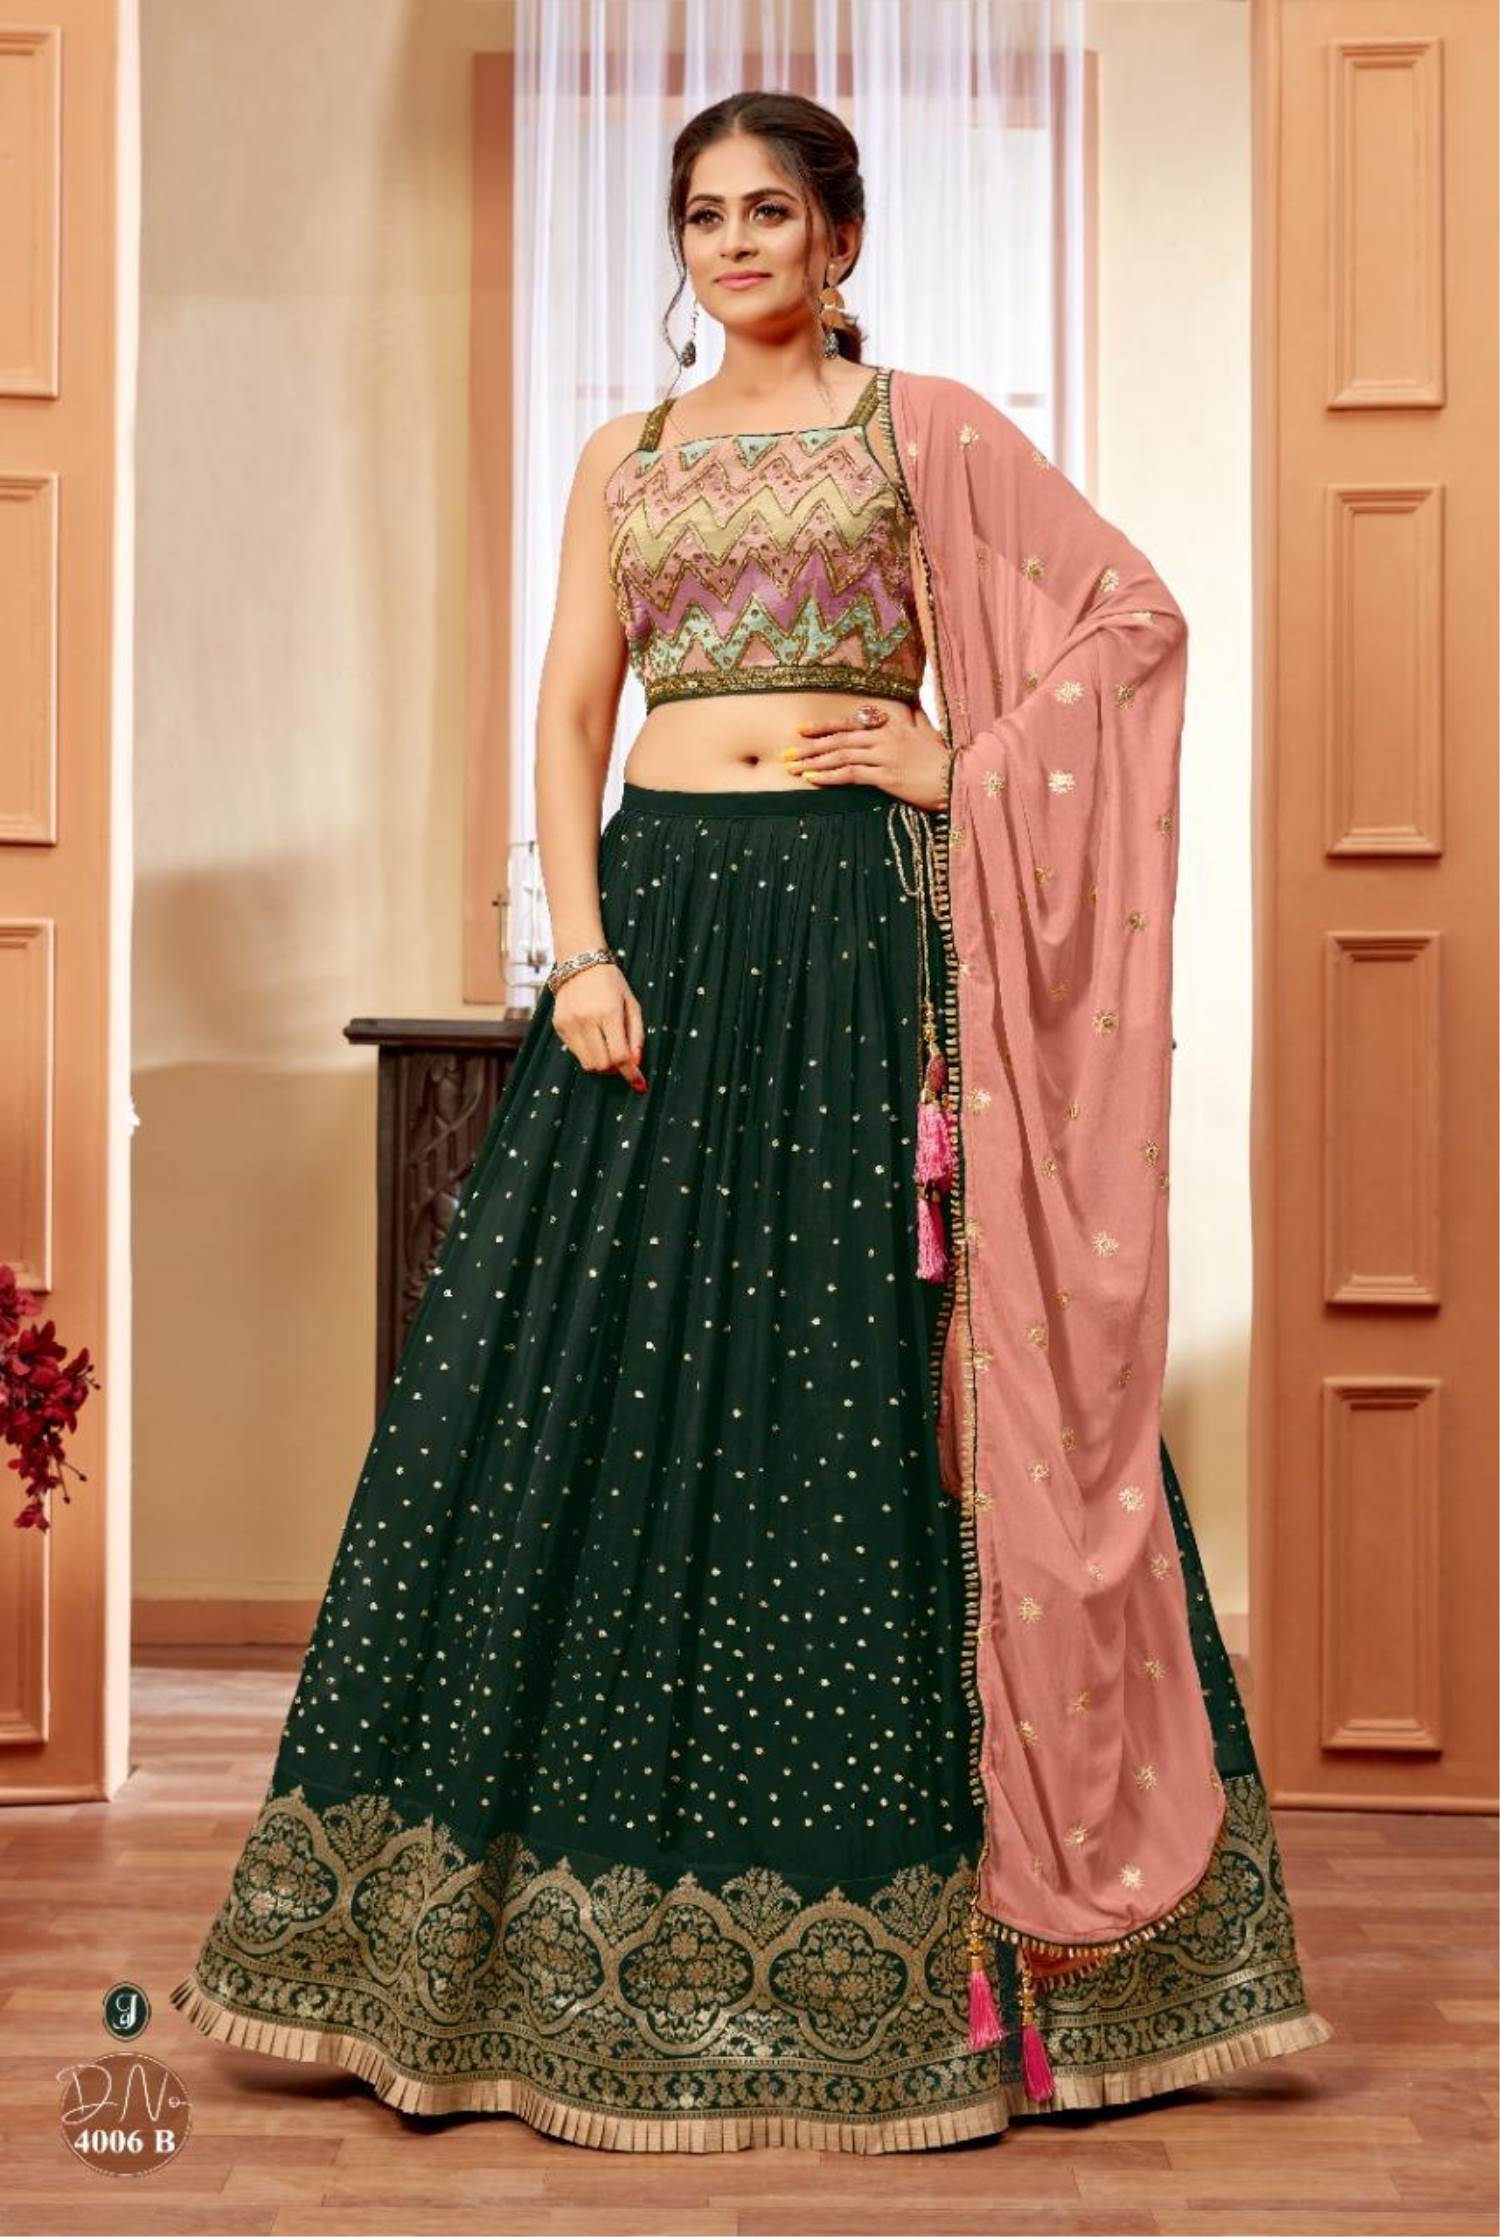 Pink and green combination bridal lehenga for wedding day | Indian dresses,  Indian bridal, Indian bridal wear